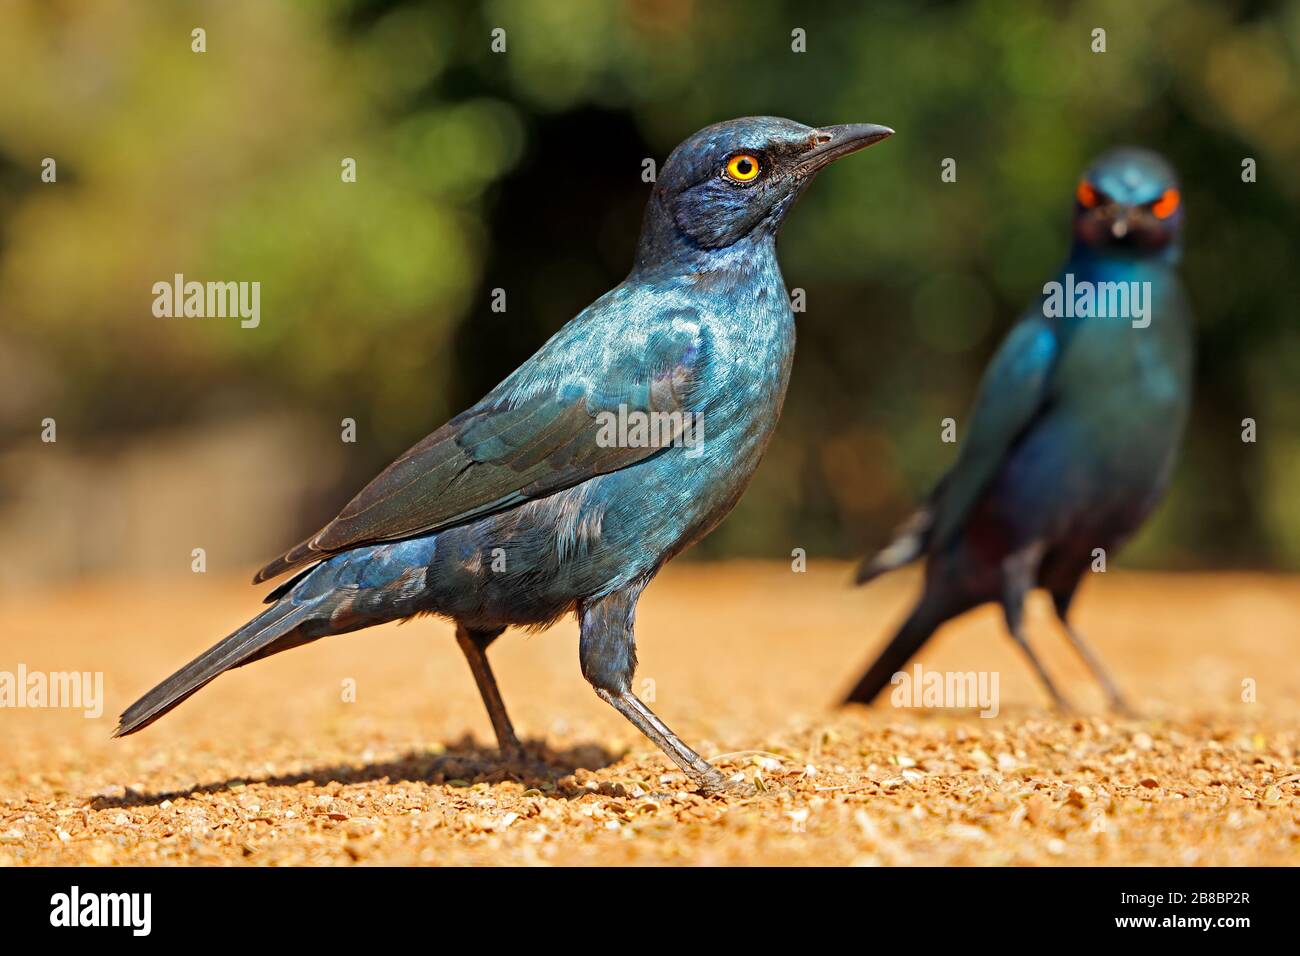 Alert greater blue-eared starlings (Lamprotornis chalybaeus), Kruger National Park, South Africa Stock Photo